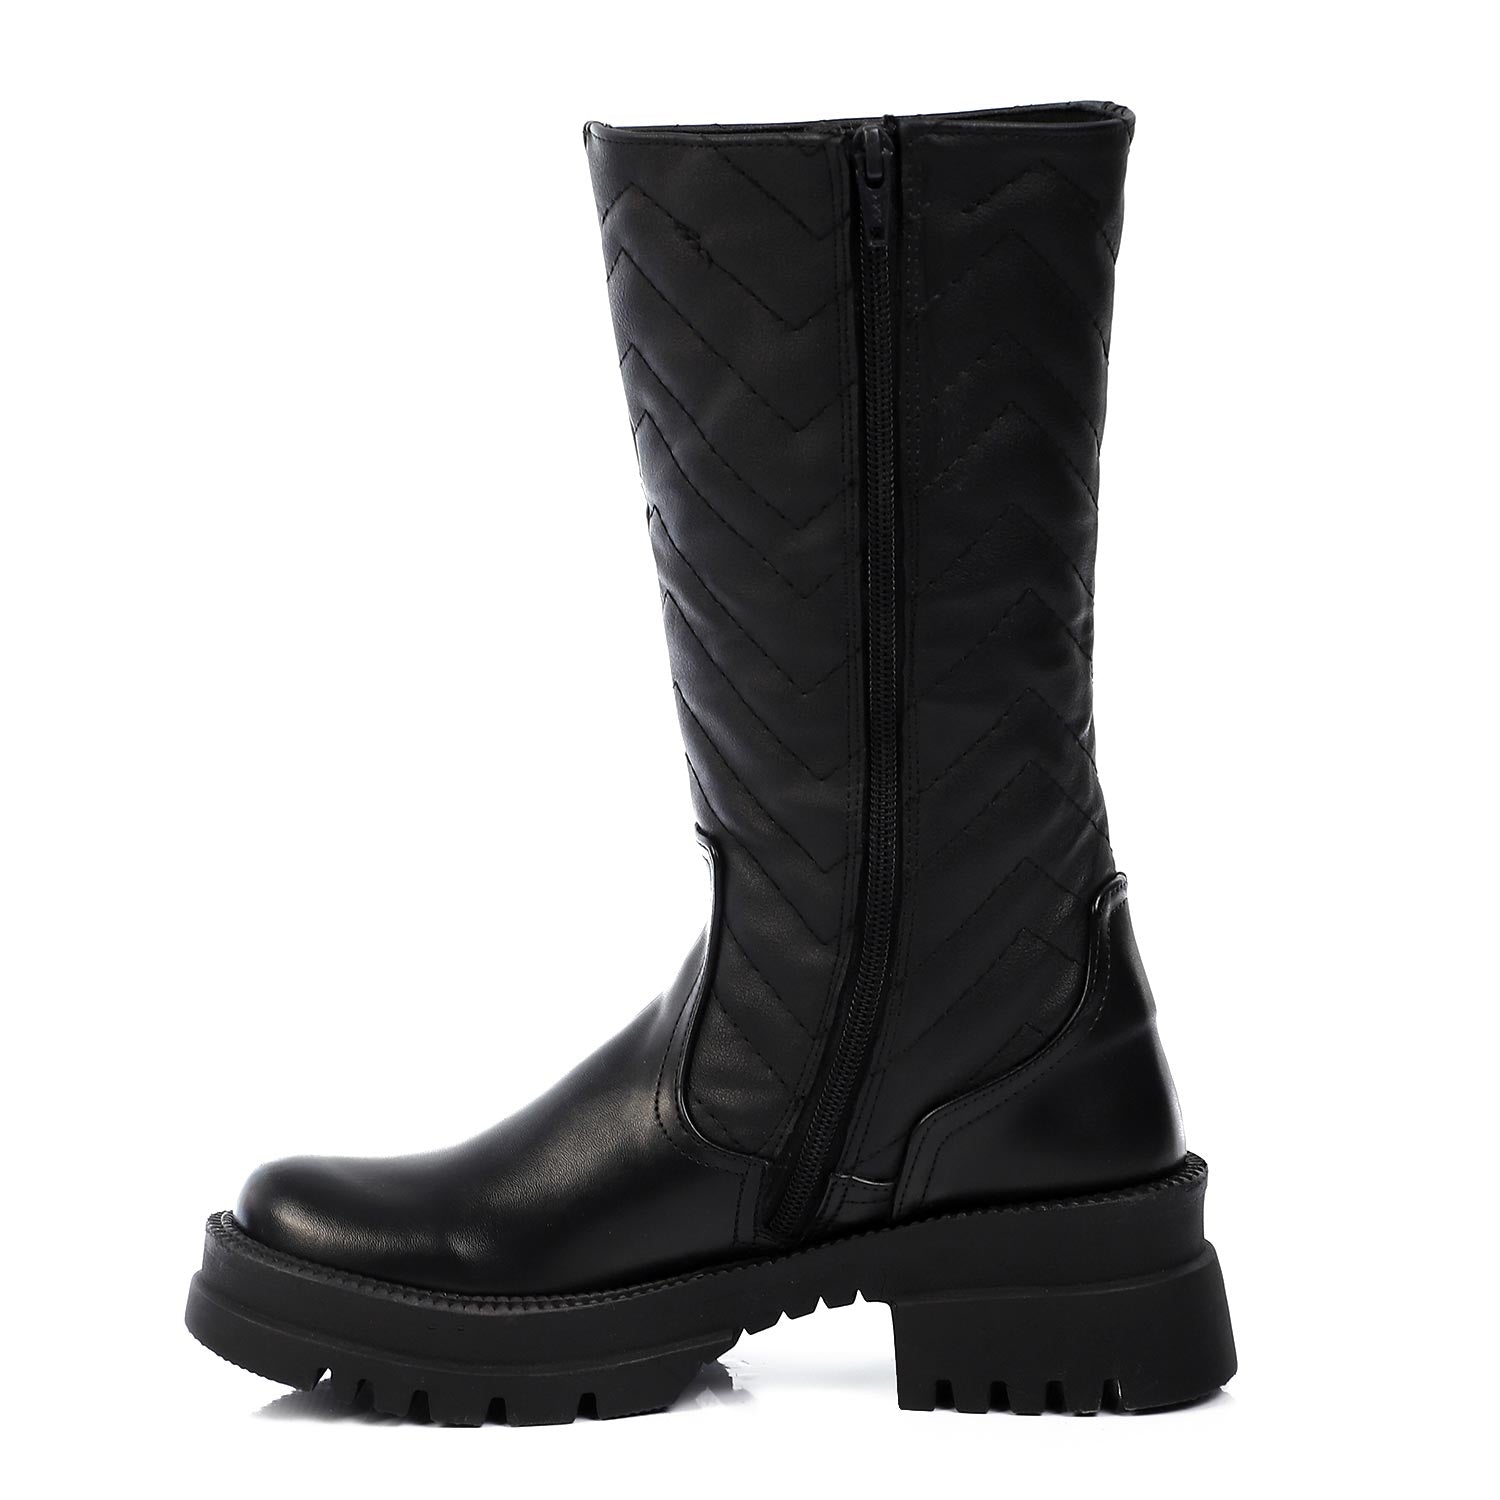 Mr Joe Quilted Leather Zipper Mid Calf Boots